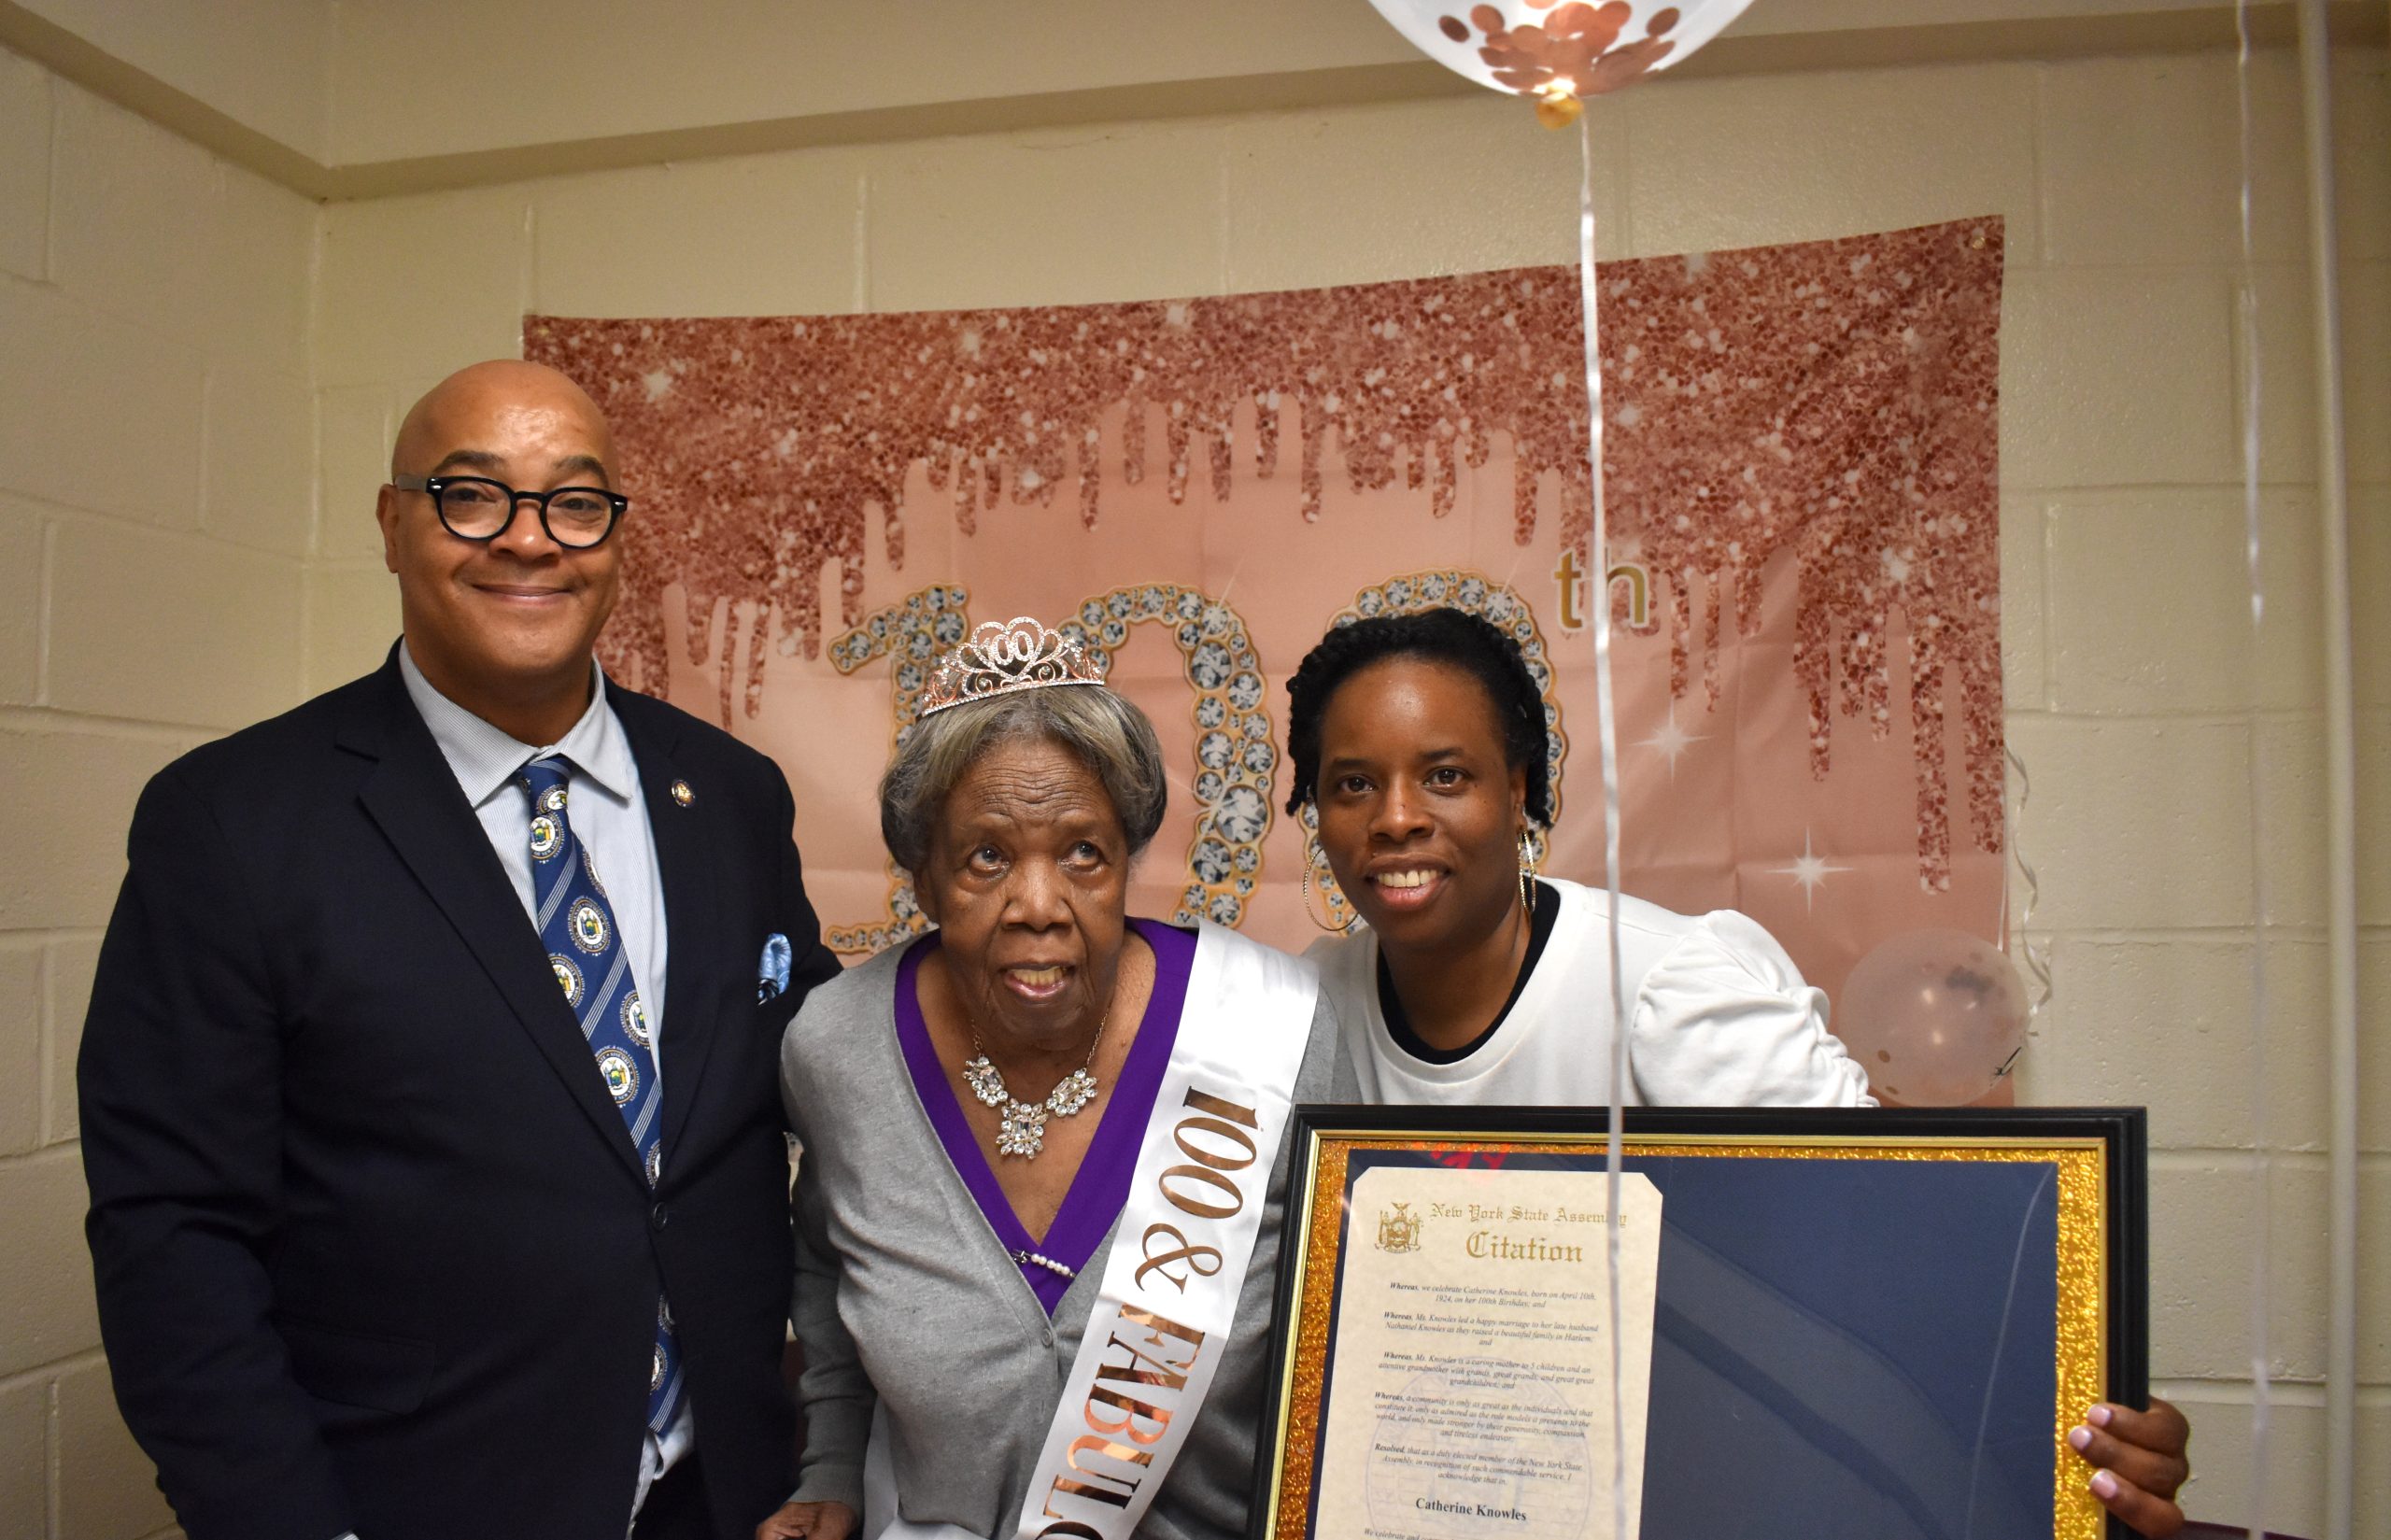 Lifelong Harlem resident Catherine Knowles turns 100 years old, receives citation from AM Gibbs